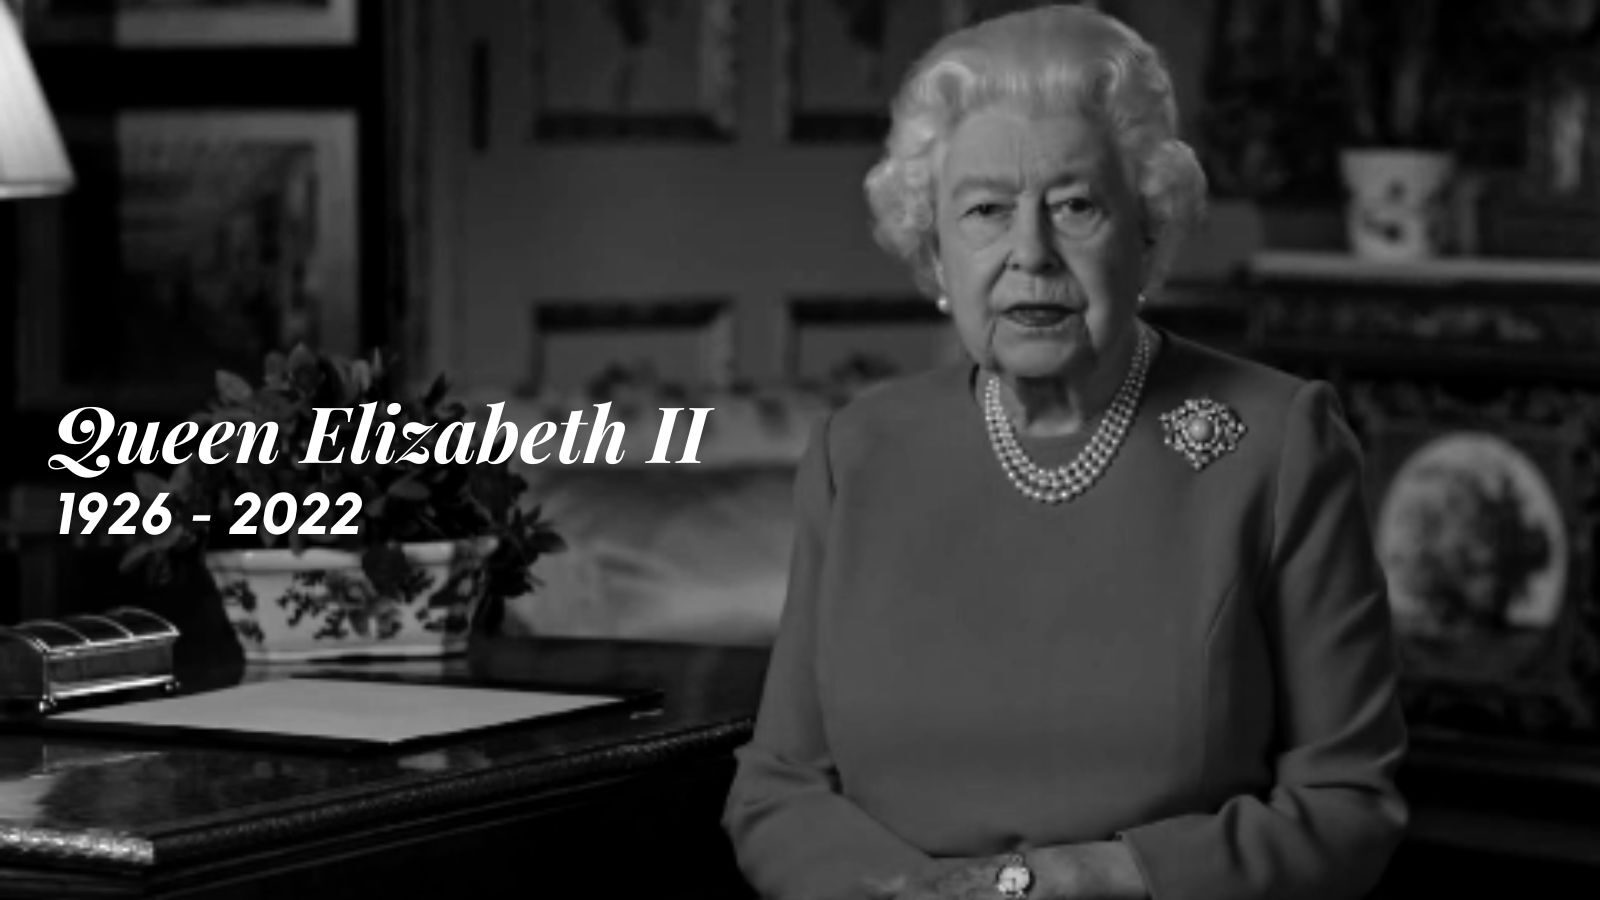 Remembering Queen Elizabeth II: A moderniser who steered the